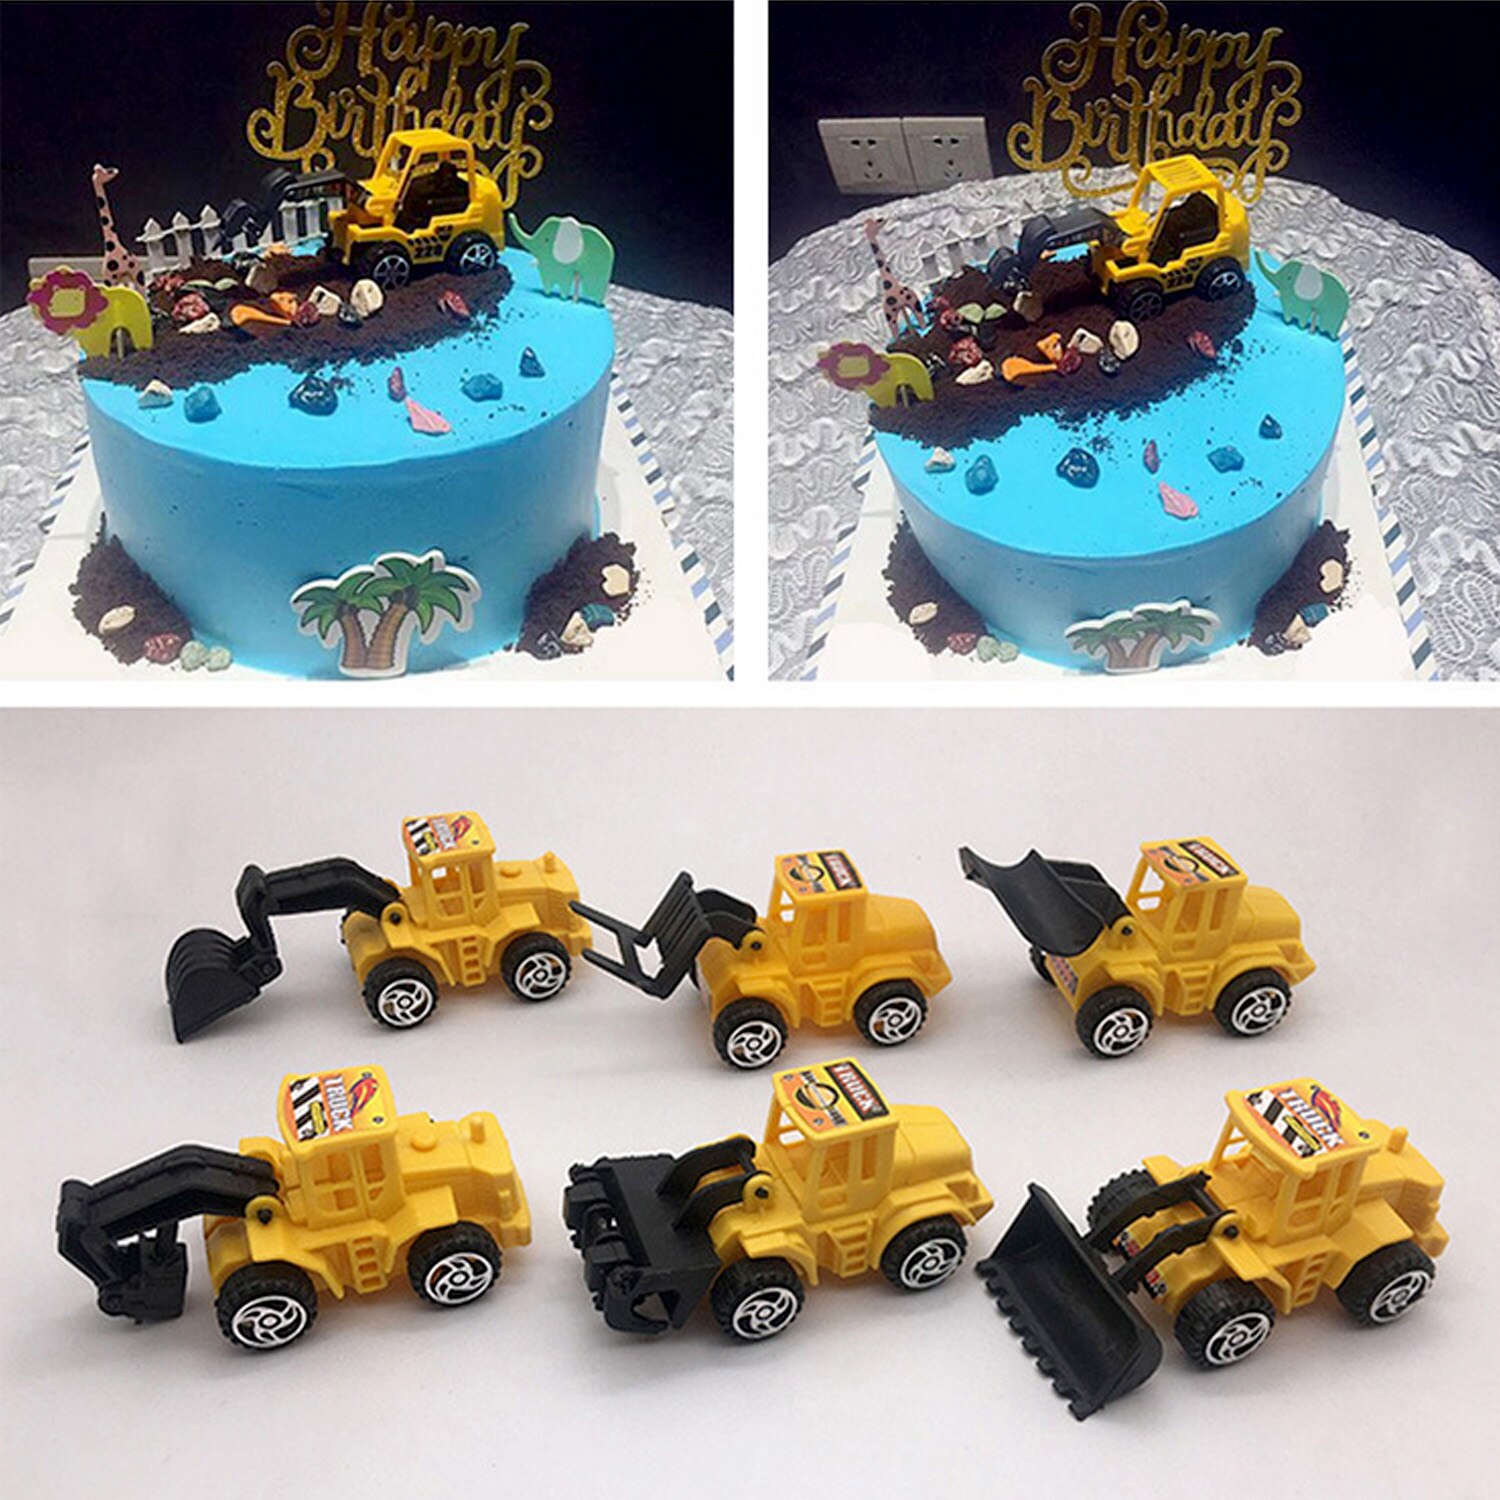 Behogar 5PCS Yellow Engineering Vehicle Cake Decorations for Construction Themed Party Baking Cute Birthday Decorations